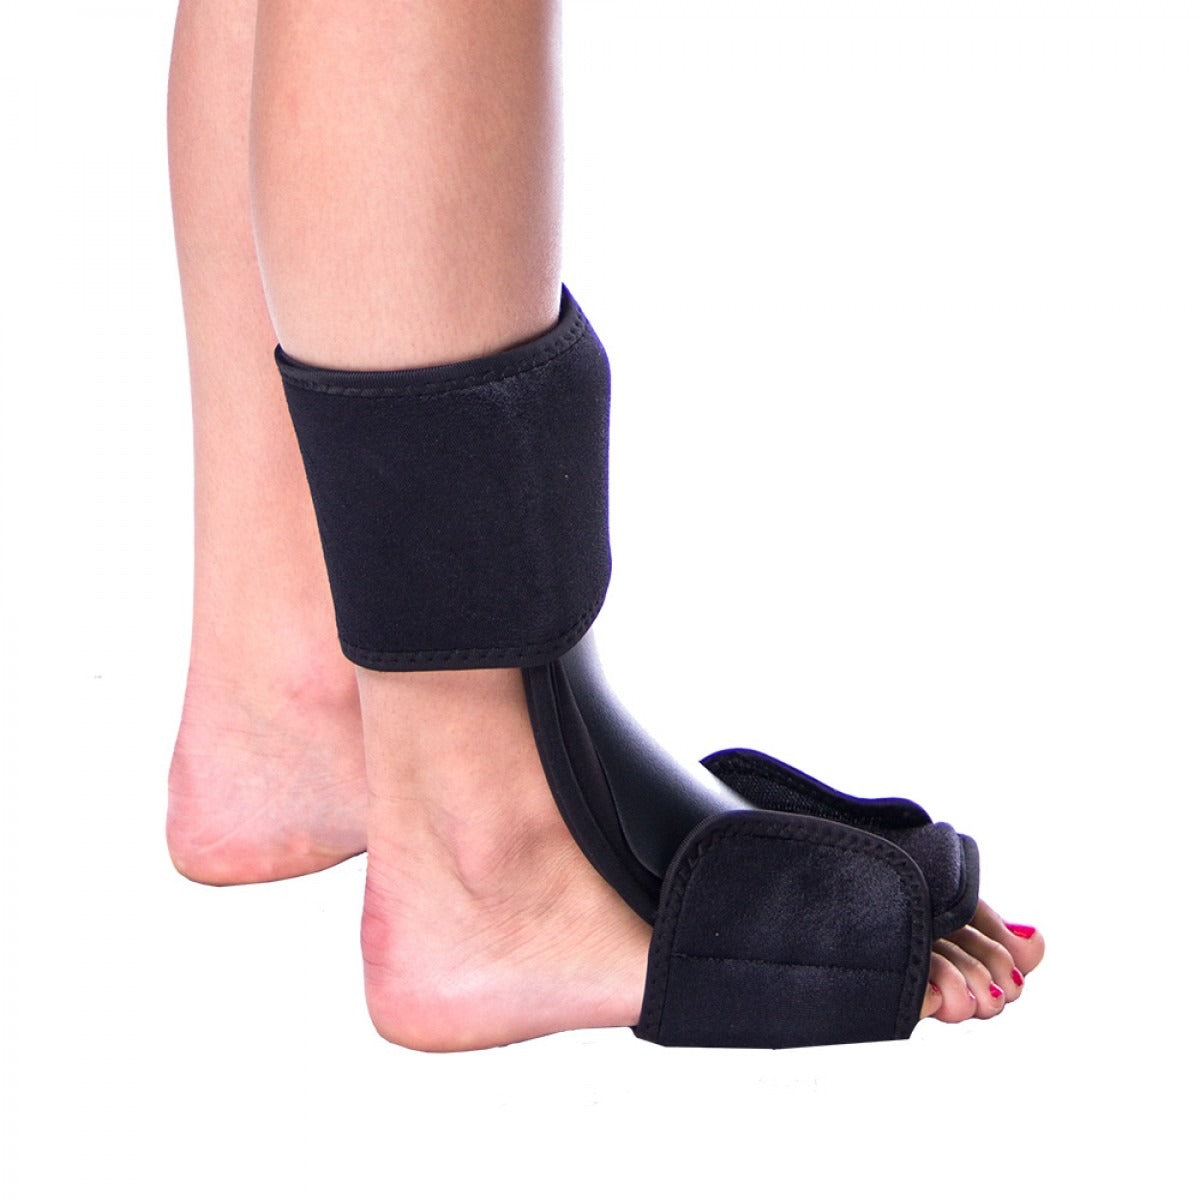 Nighttime splint for achilles tendon, calf stretching, and ankle dorsiflexion